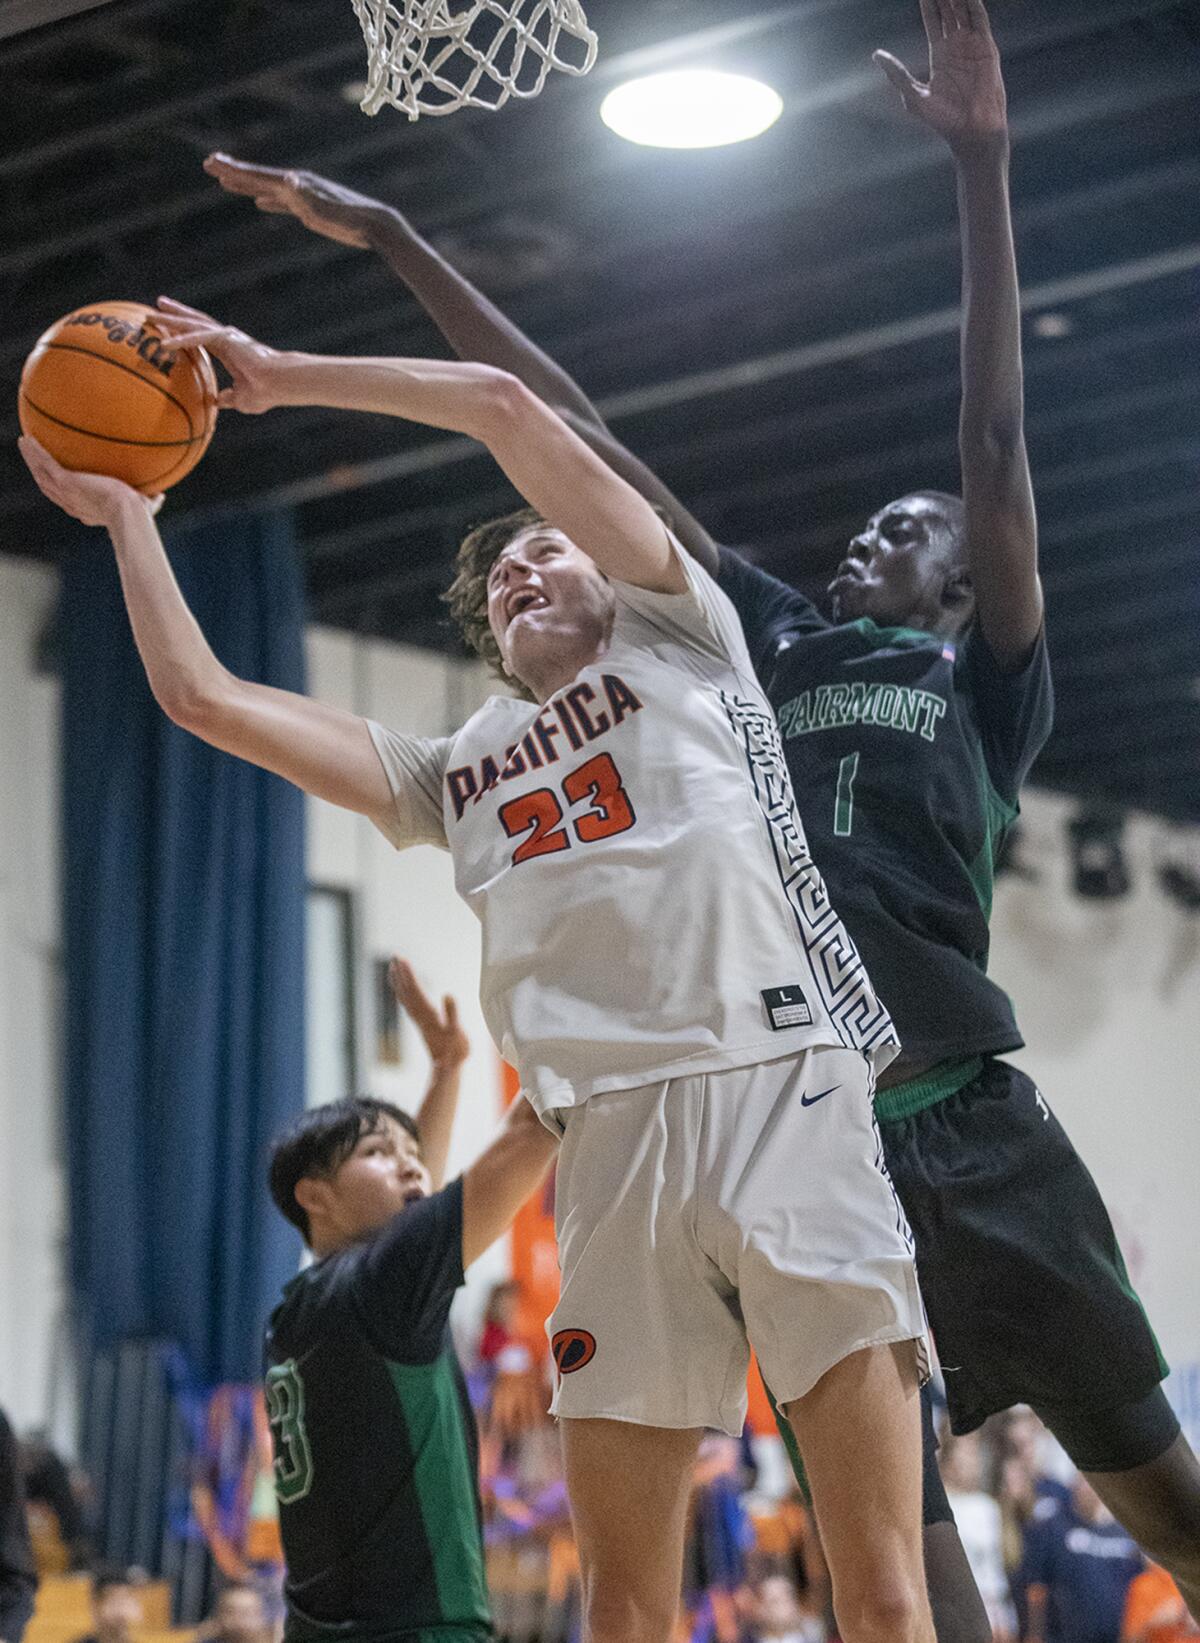 Pacifica Christian Orange County's Dylan Godfrey takes a shot under pressure from Fairmont Prep's Maper Maker.